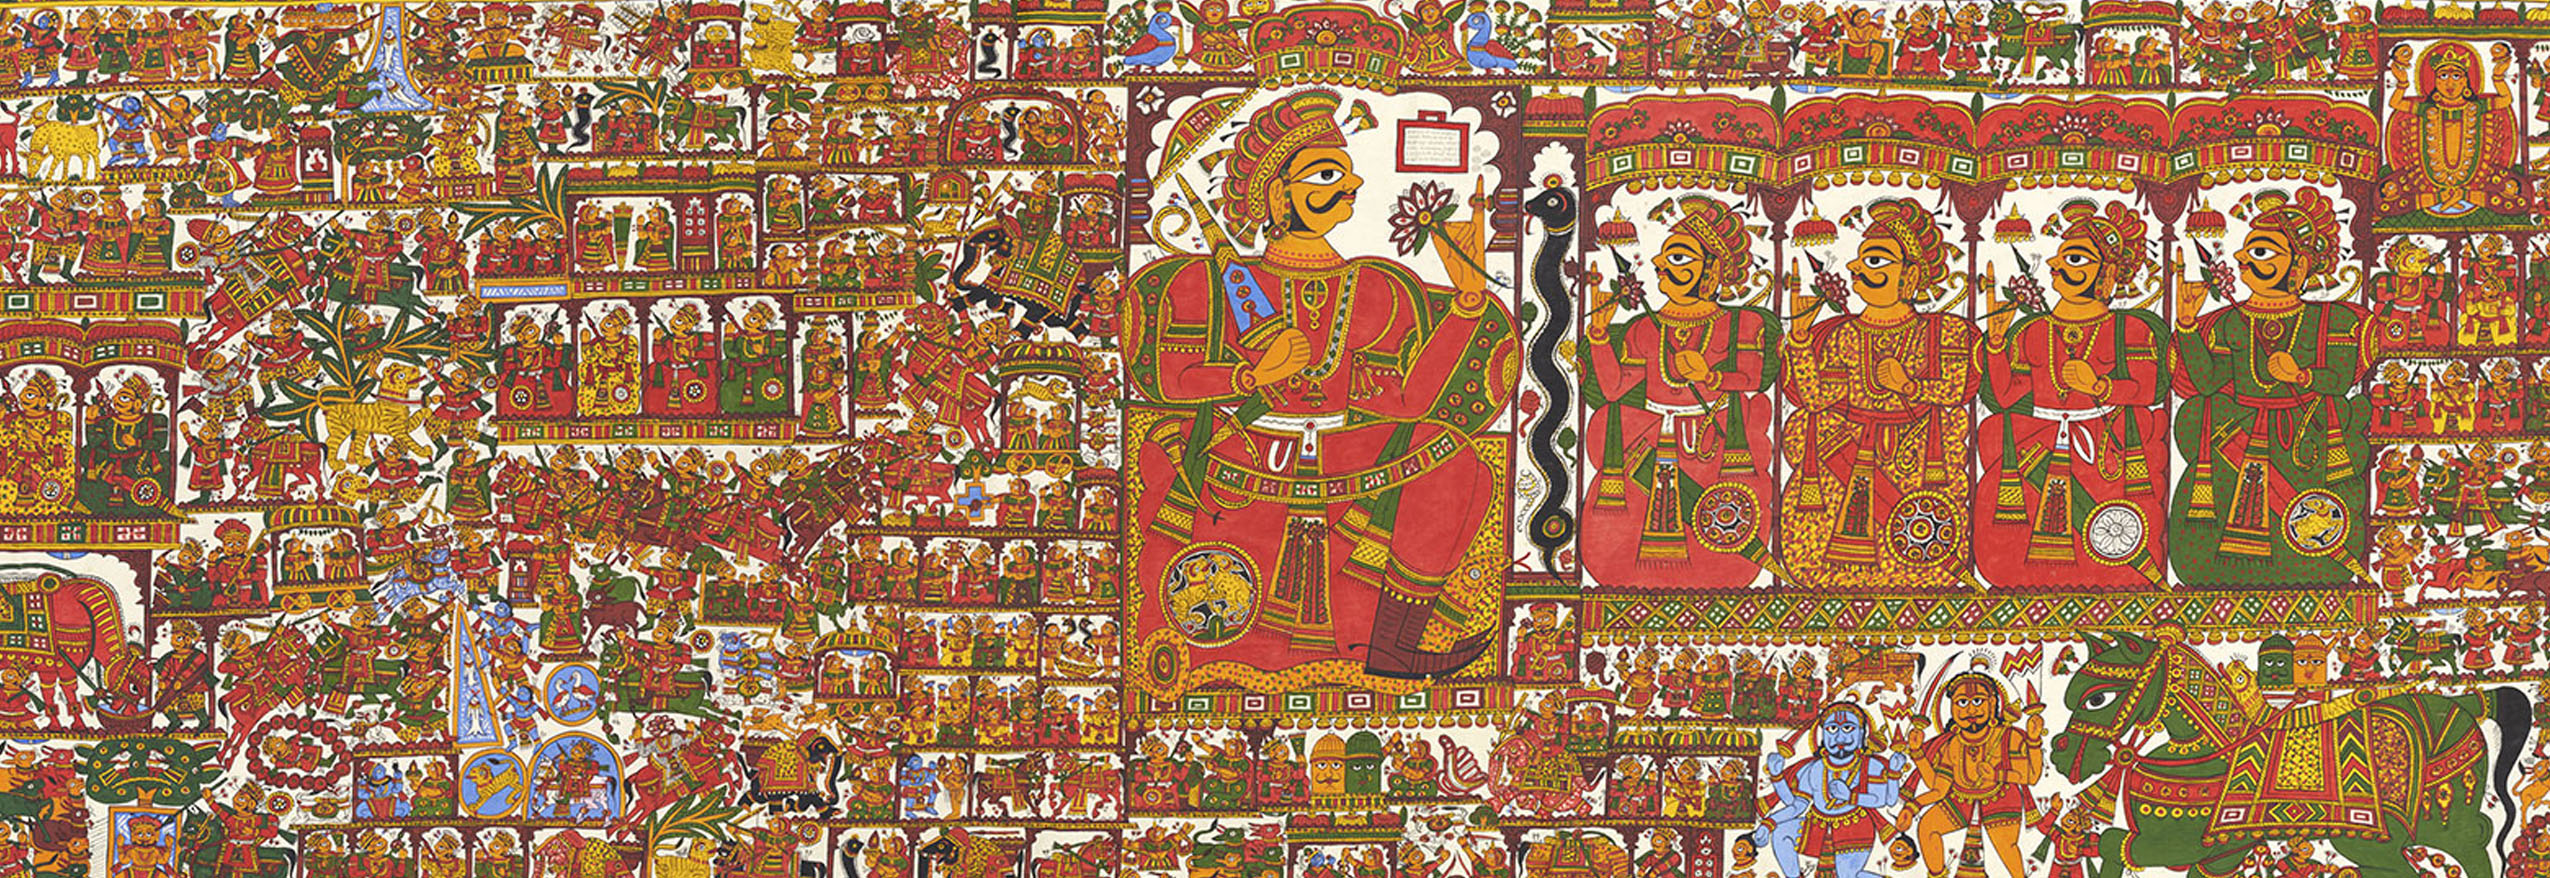 A horizontal scroll-painting narrating the epic of the deity Pabuji, the central figure of the painting.